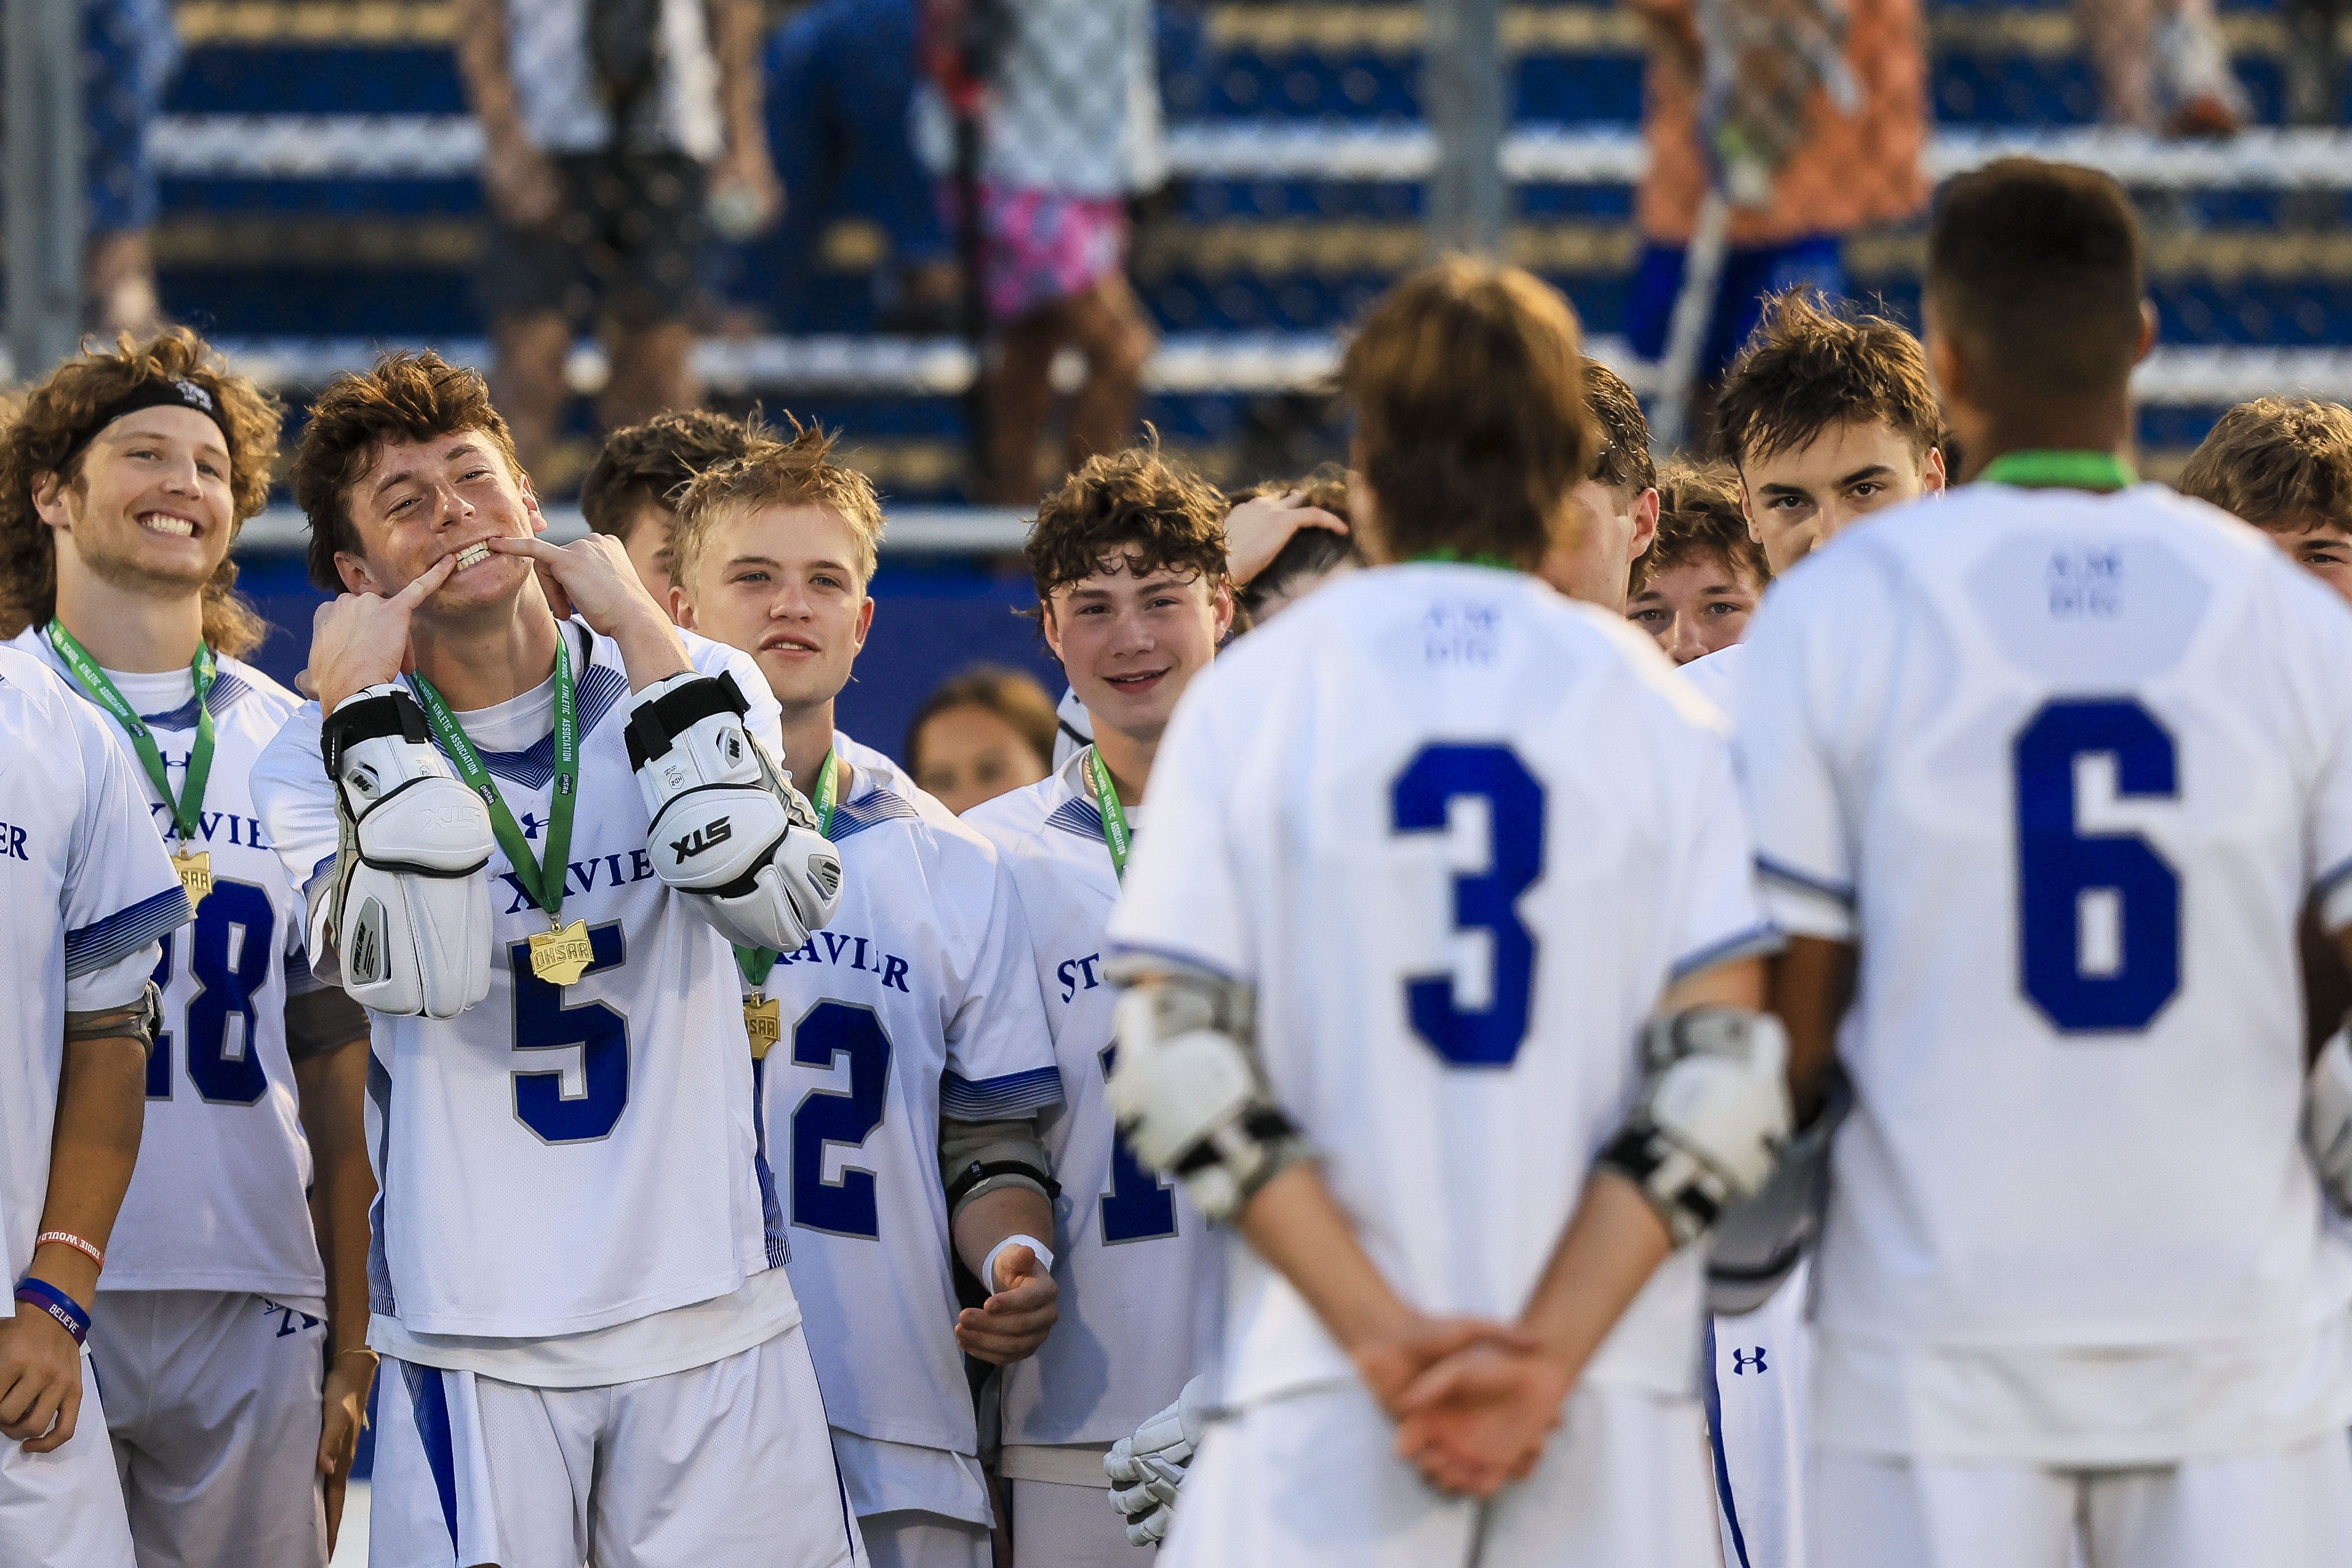 Who could St. Xavier, Indian Hill and Kings meet in OHSAA lacrosse state tournament?